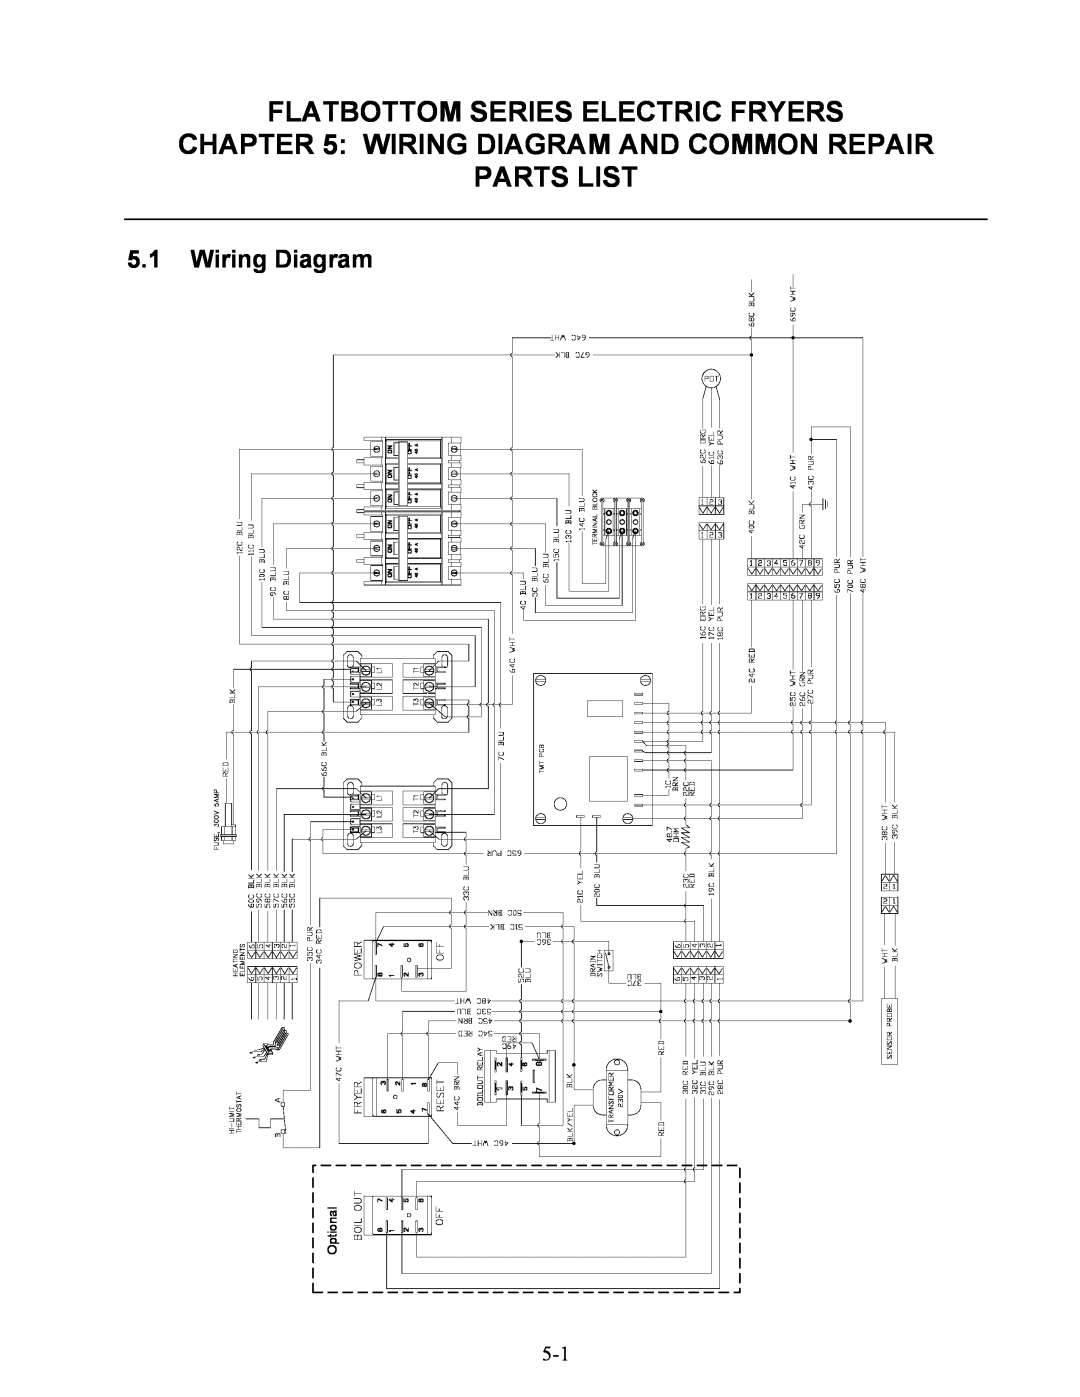 Frymaster 824E, 2424E Wiring Diagram And Common Repair, Parts List, 5.1Wiring Diagram, Flatbottom Series Electric Fryers 